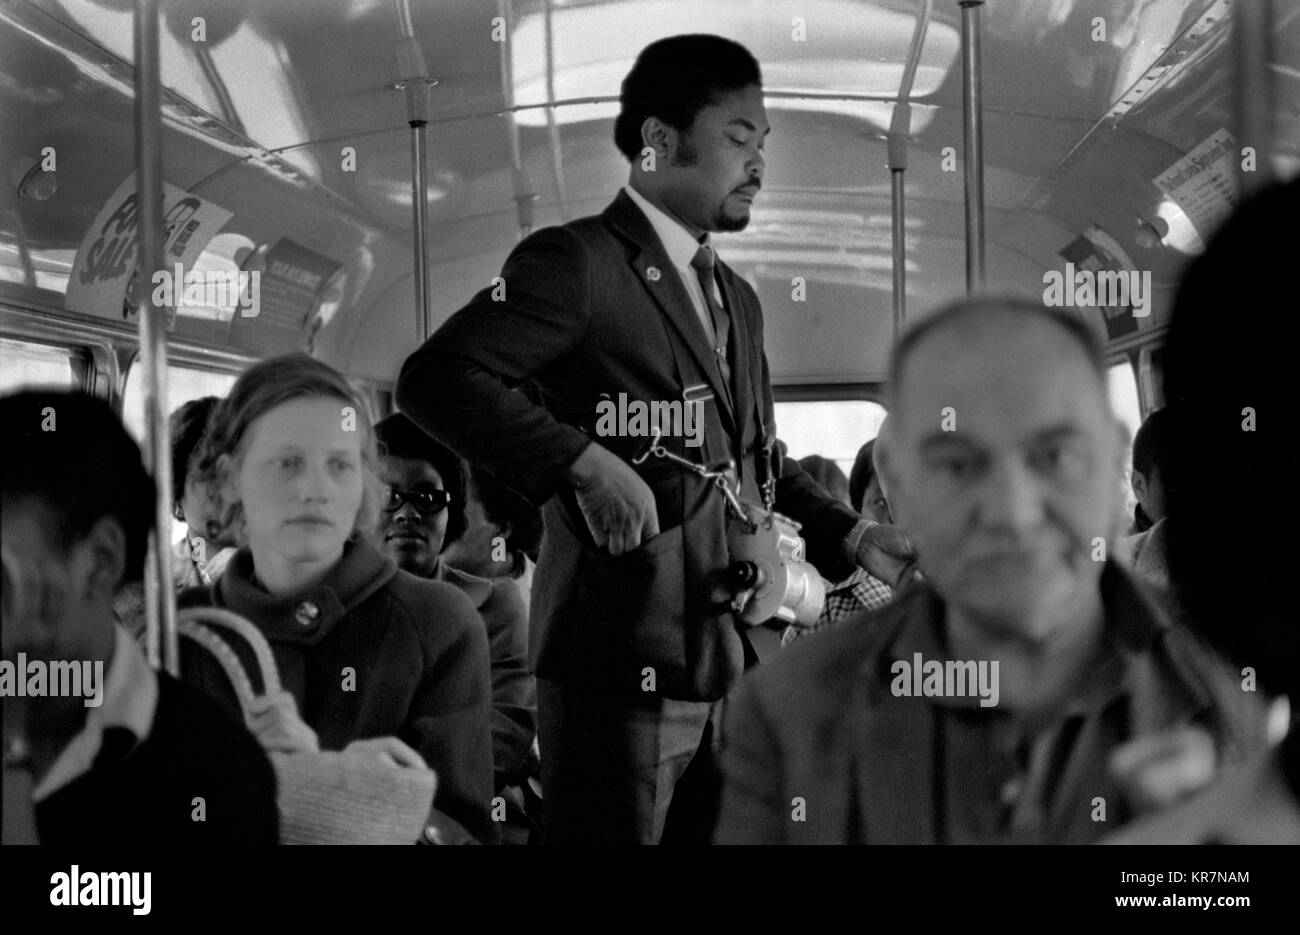 Transport London 1970s. Bus conductor walking up and down the bus, this is the upper deck of a double decker bus. He is taking peoples fare money and giving them  tickets from his ticket machine, thats slung around his neck and shoulders and seen on his chest. 1970s London multi ethnic Britain 70s HOMER SYKES Stock Photo